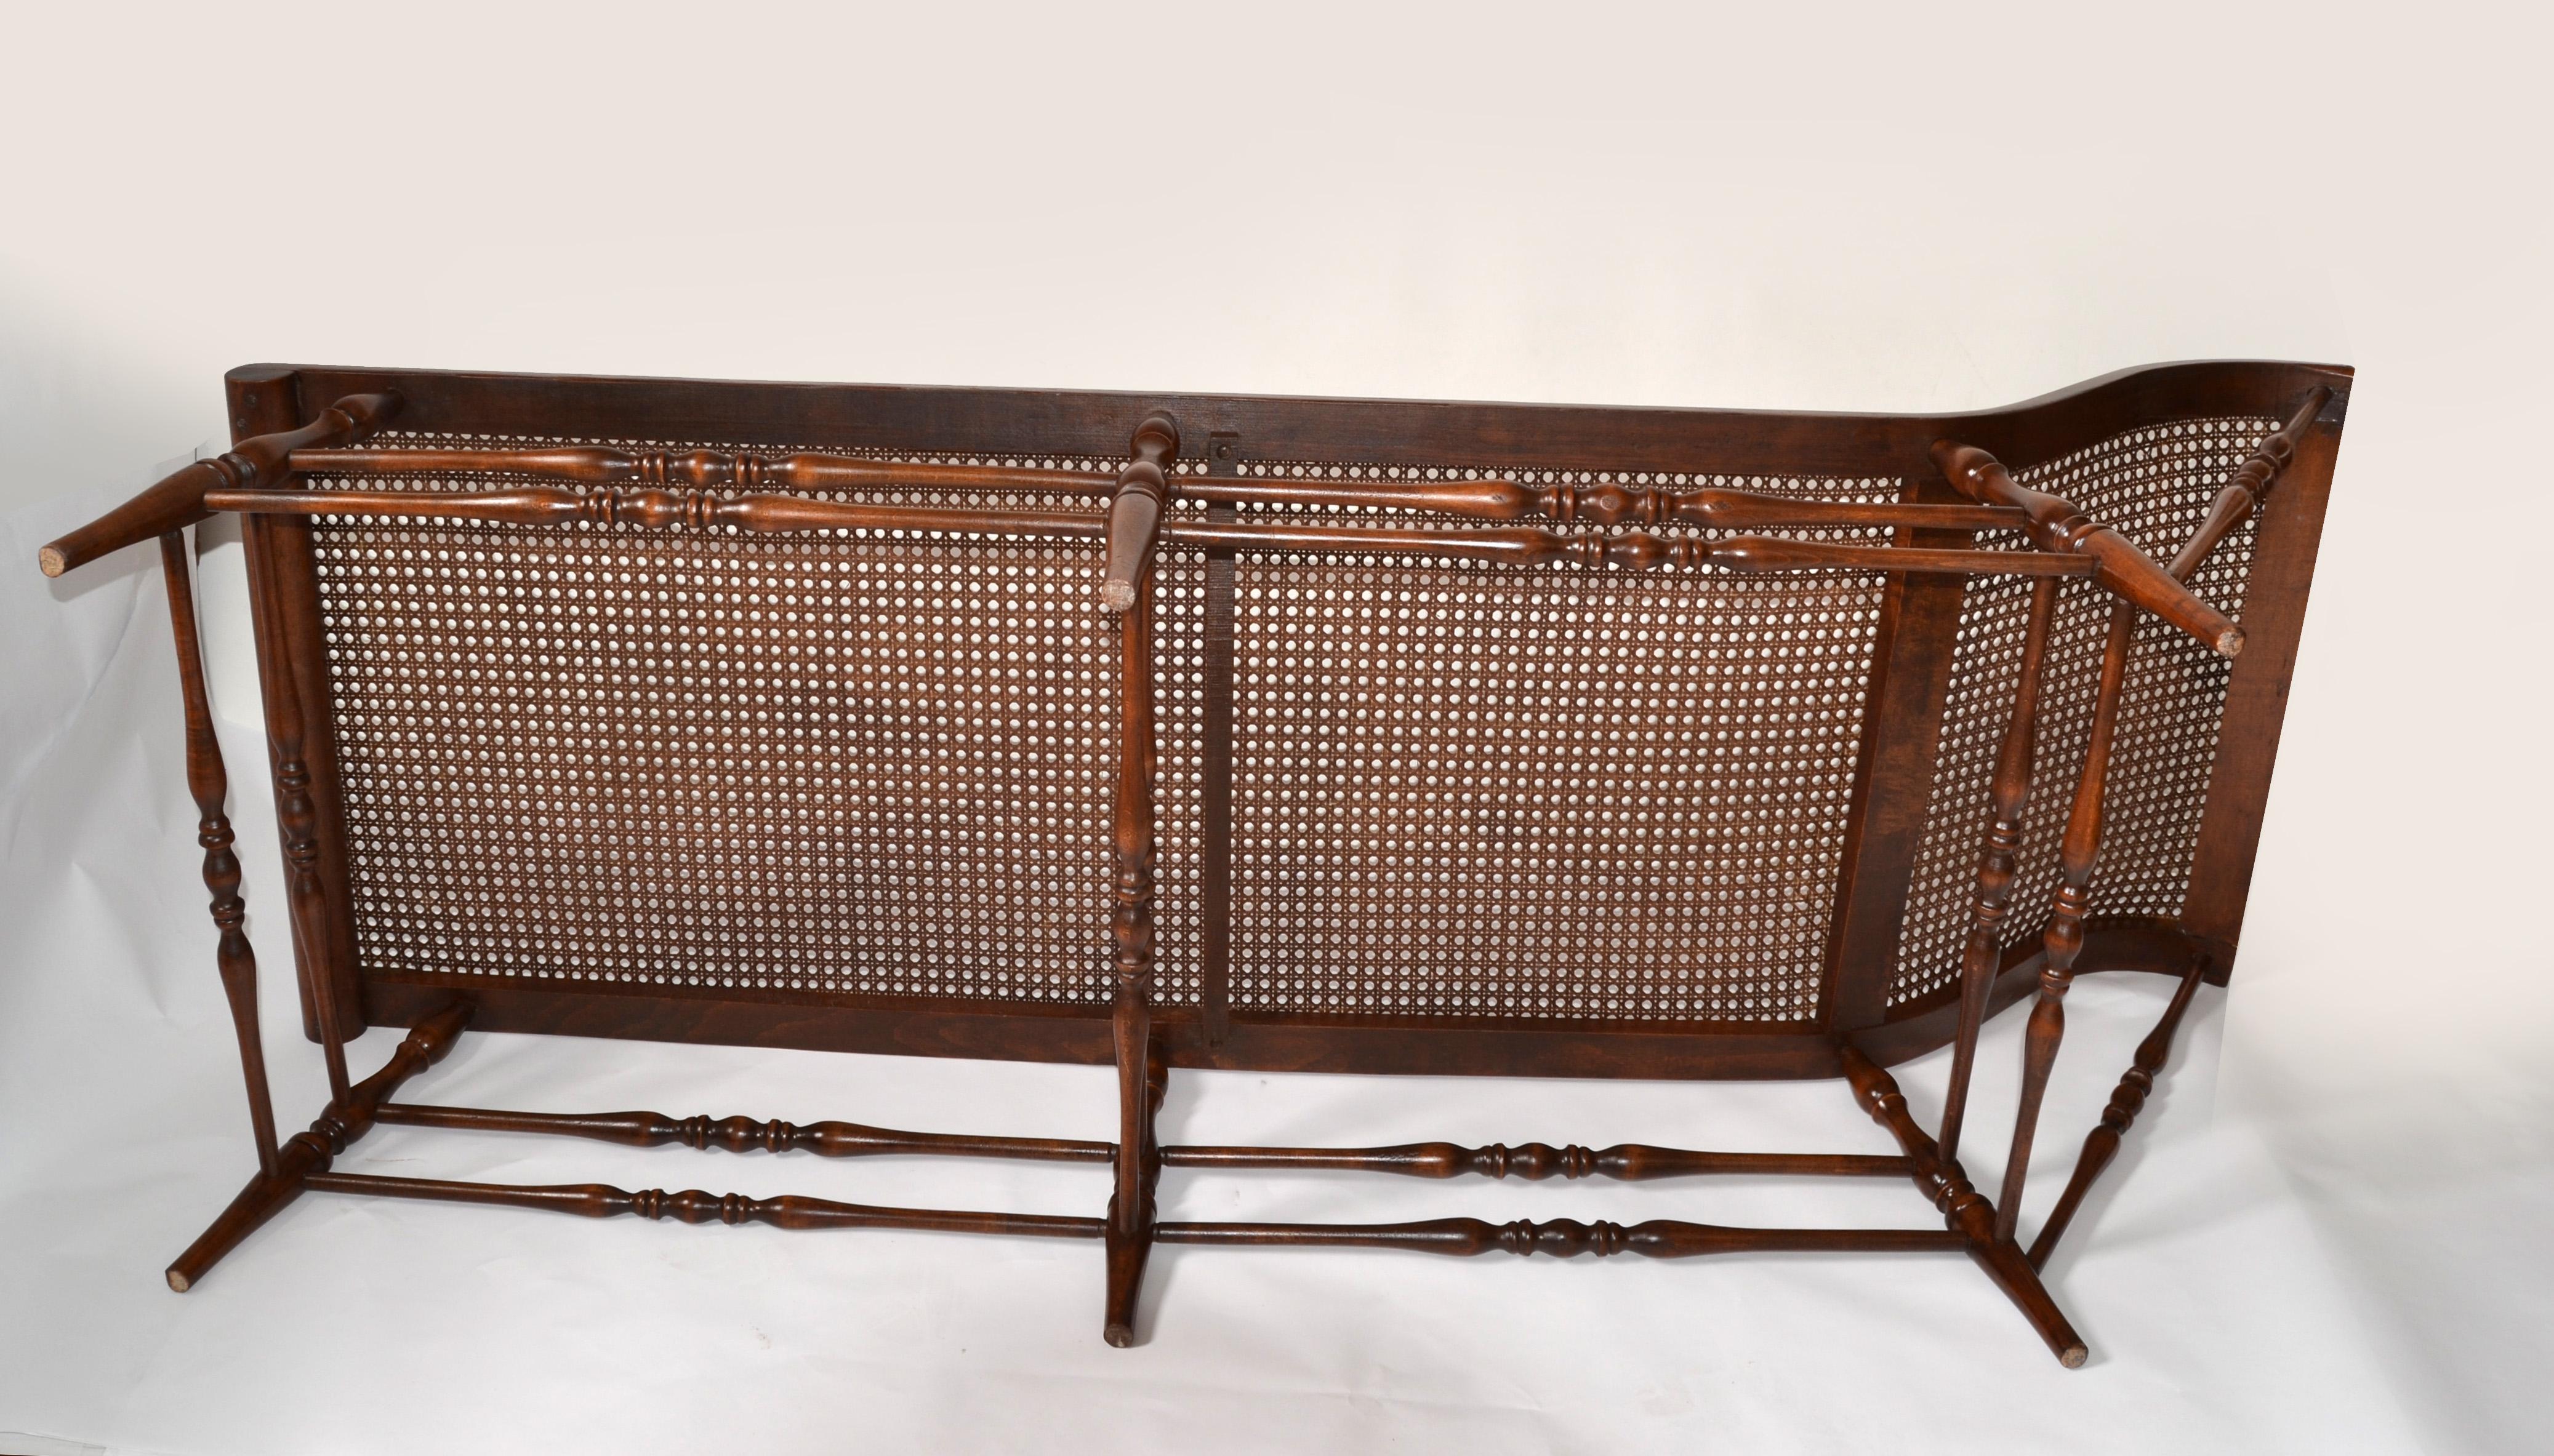 British Colonial Handwoven Cane Turned Wood Spindle Frame Chaise Lounge Daybed For Sale 8